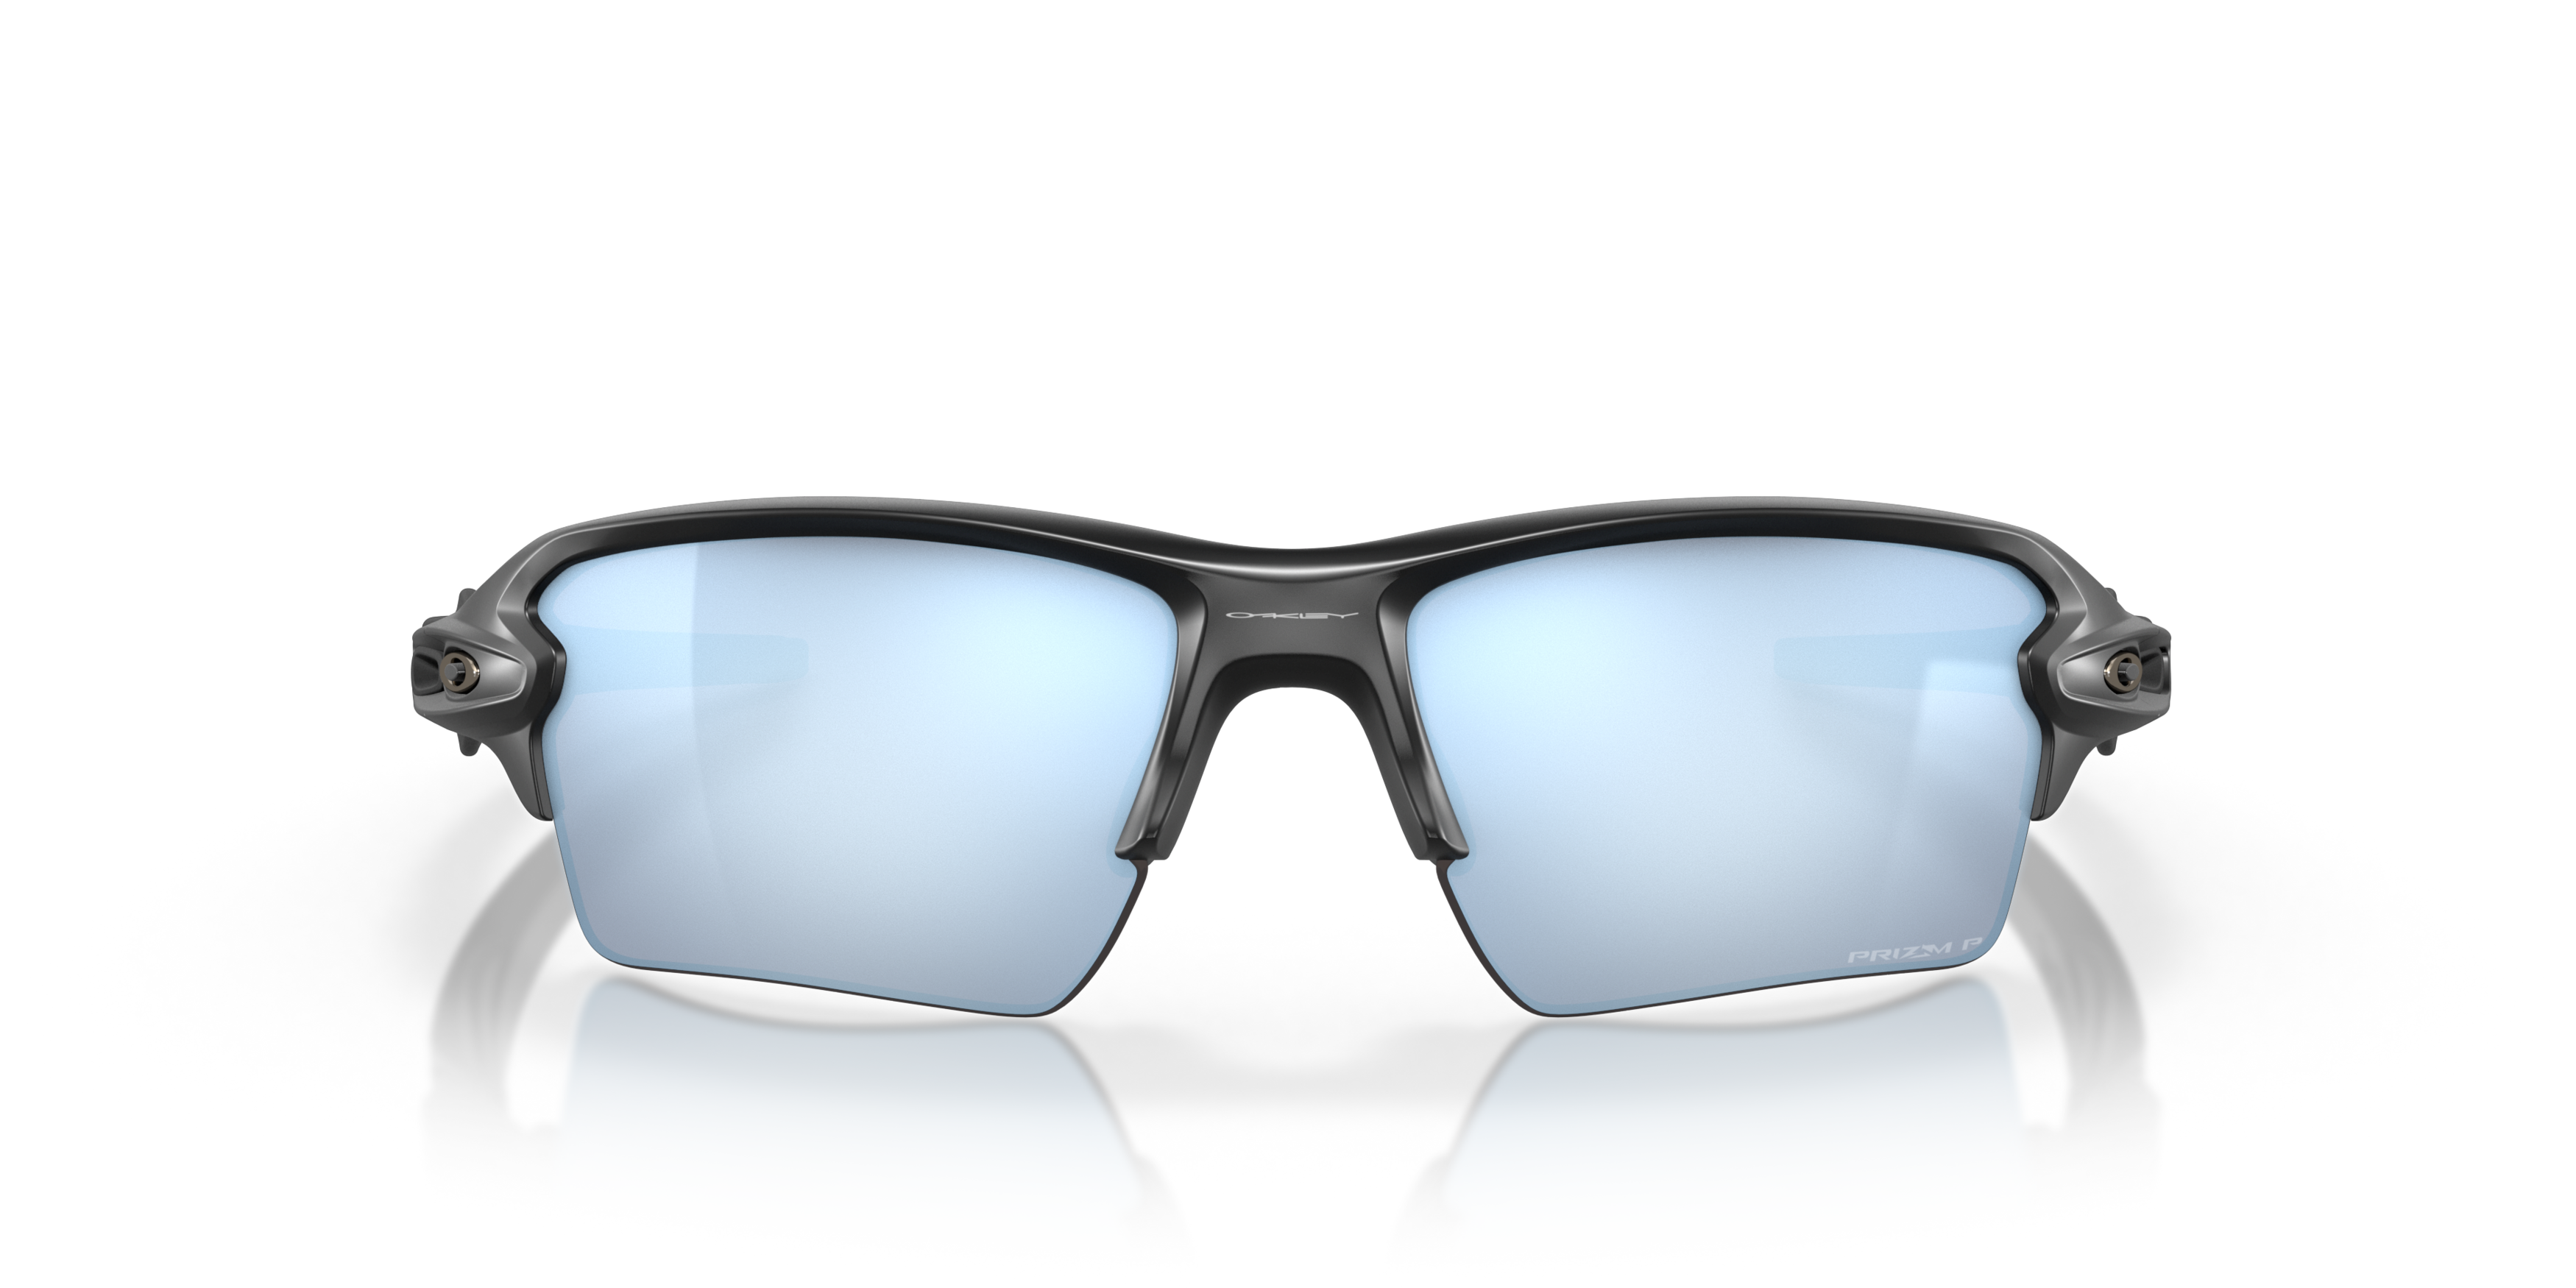 [products.image.front] Oakley Flak OO9188 918858